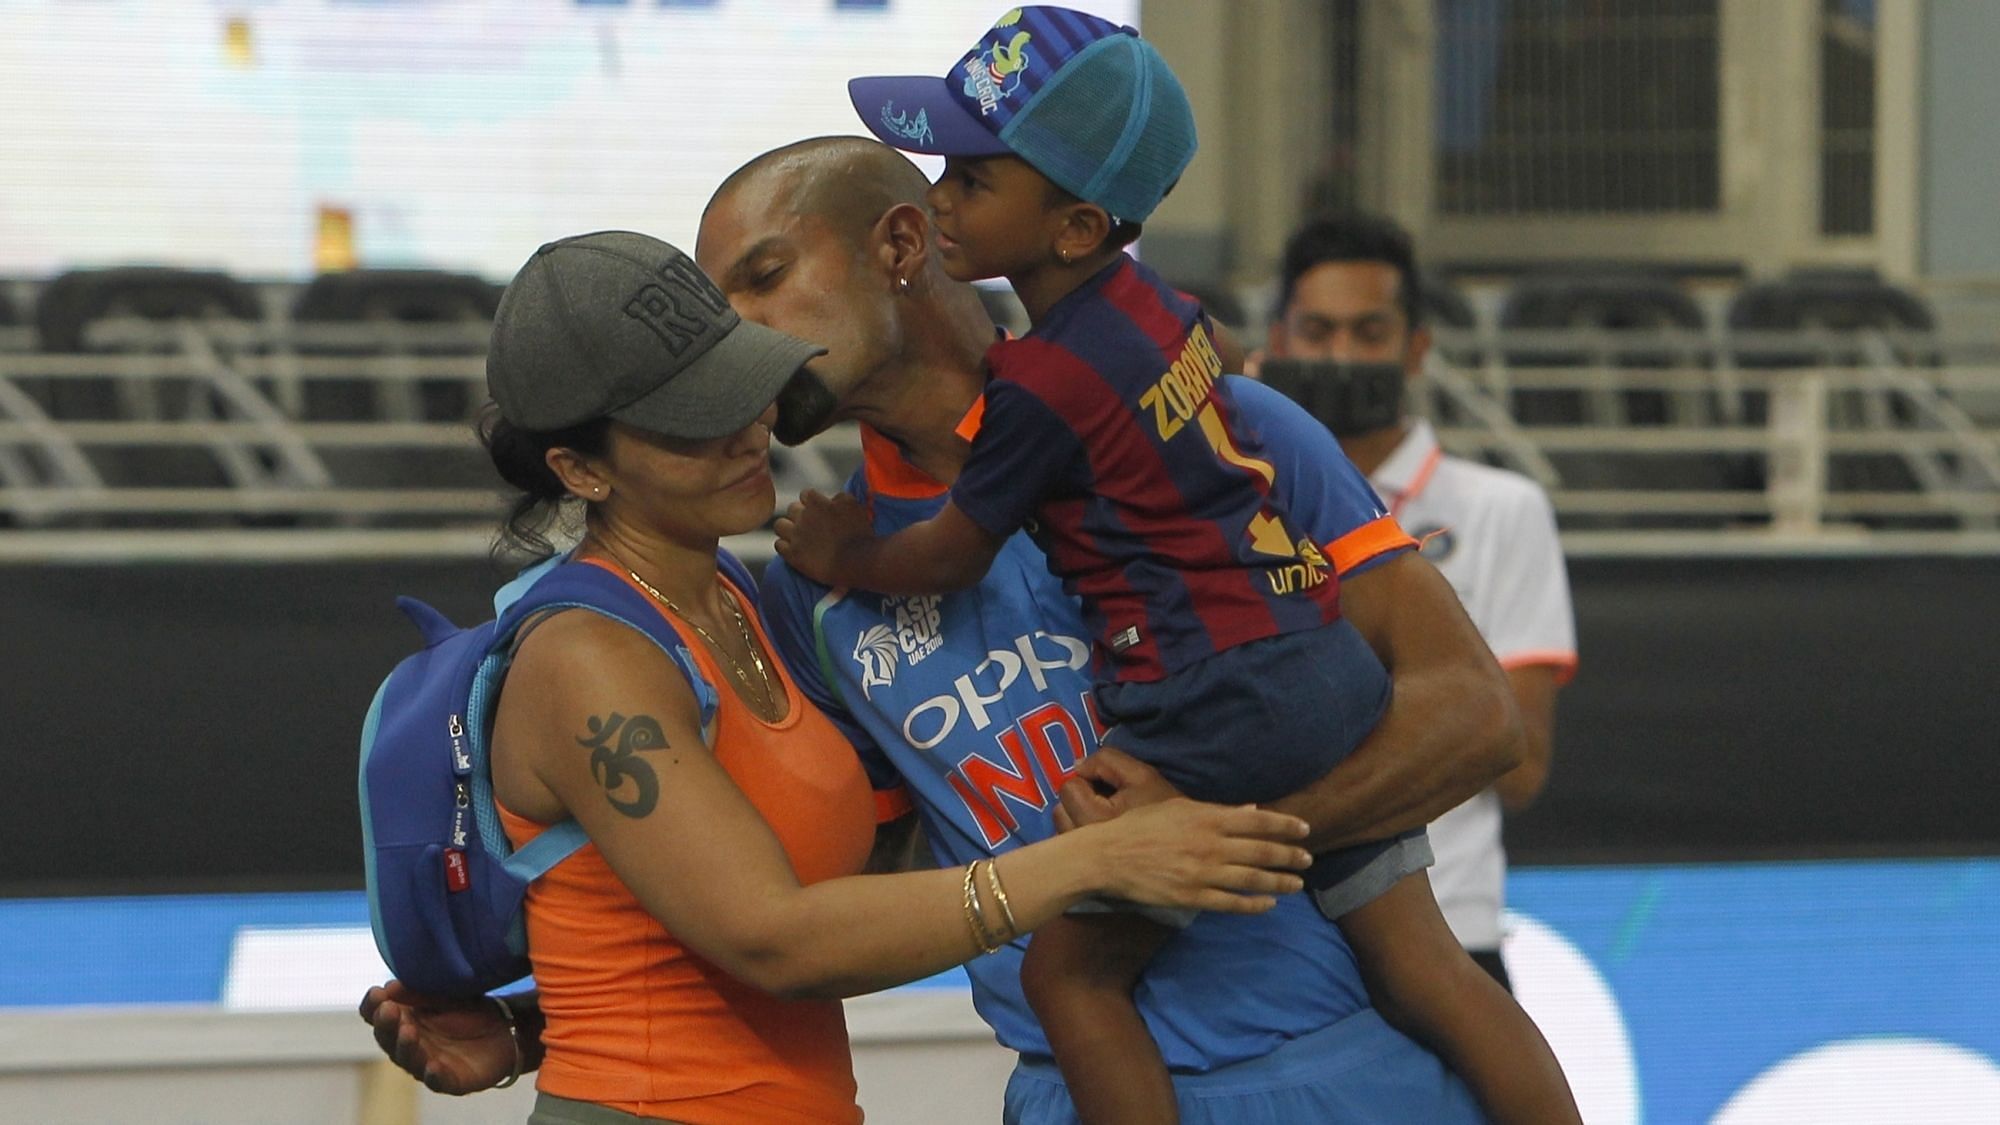 Shikhar Dhawan injured his thumb during the match against Australia and was ruled out of the World Cup.